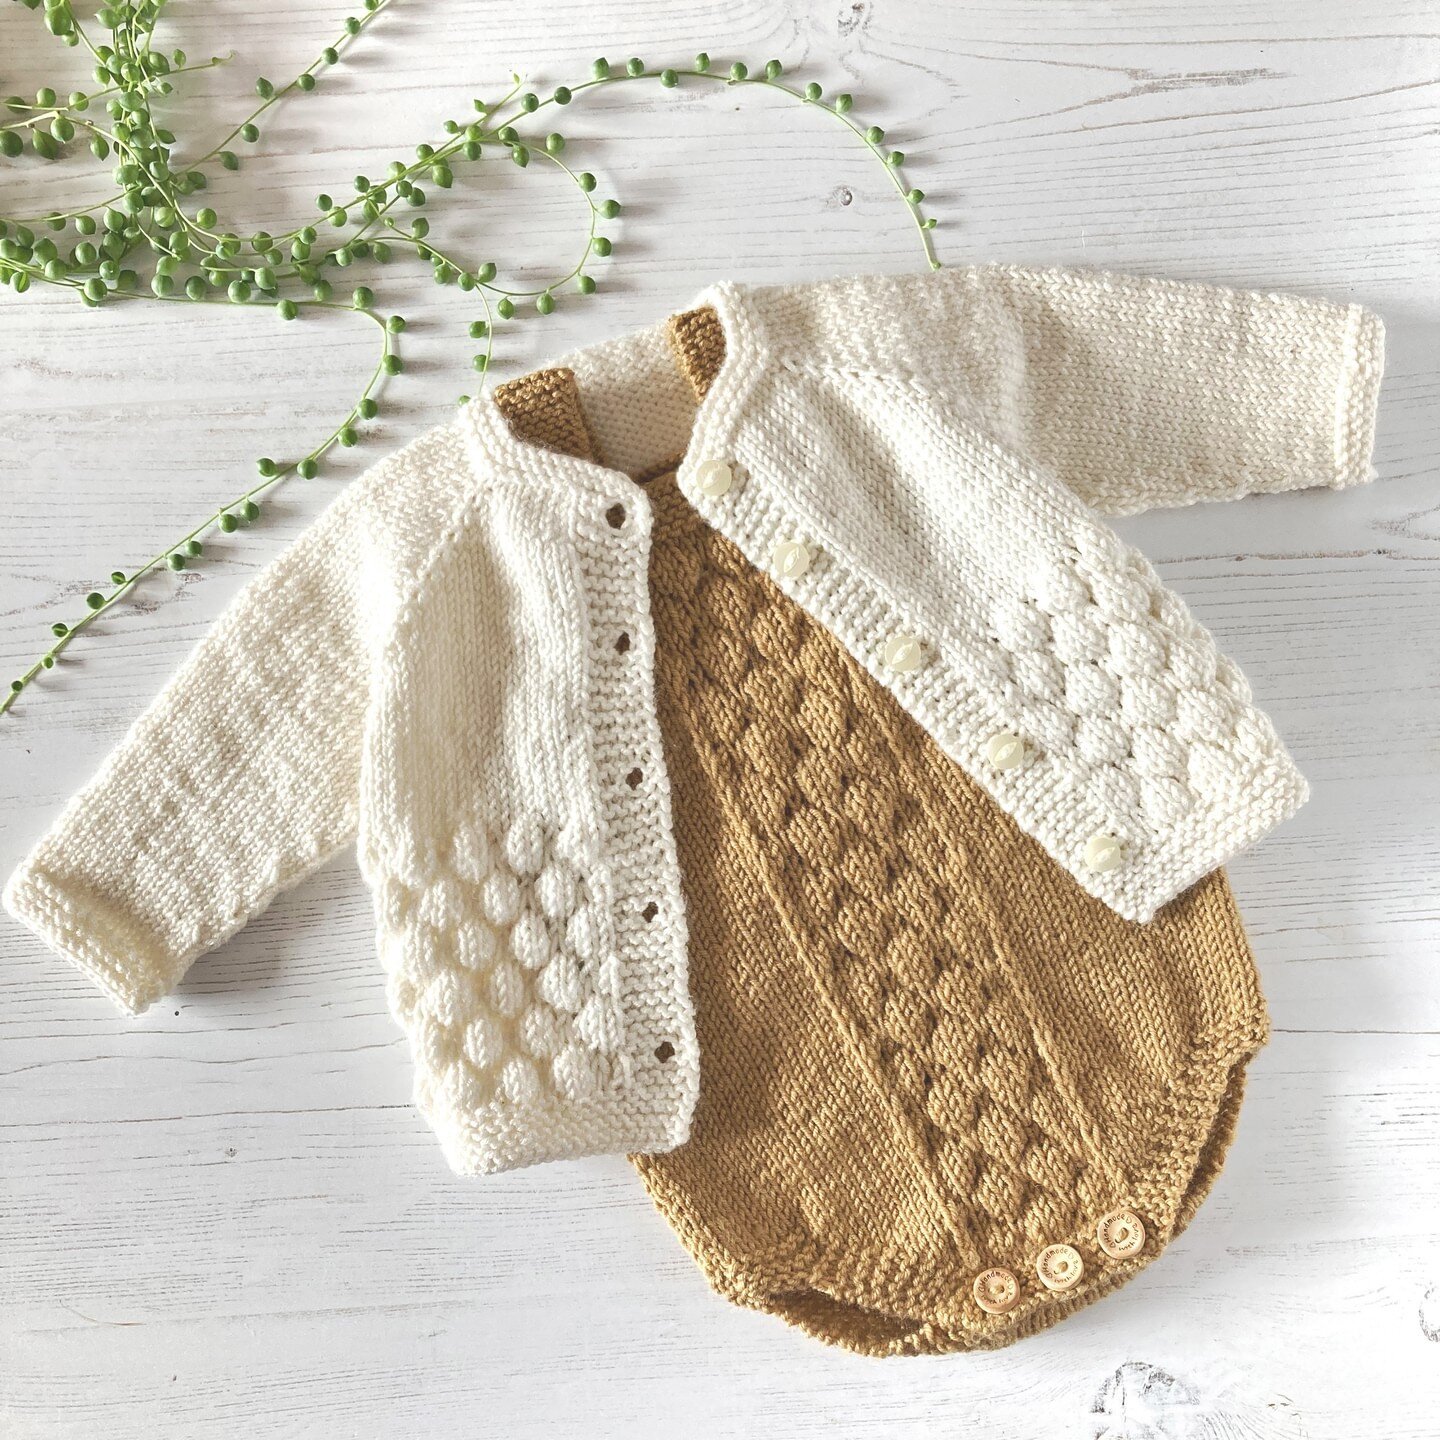 Bubble Stitch cardigan and romper knitting pattern bundle. The cardigan is knit top down, the romper is knit flat in 2 pieces and seamed.⁣
These have been knit in Rico Essentials Merino DK shades Camel for the romper and Natural for the cardigan. It'